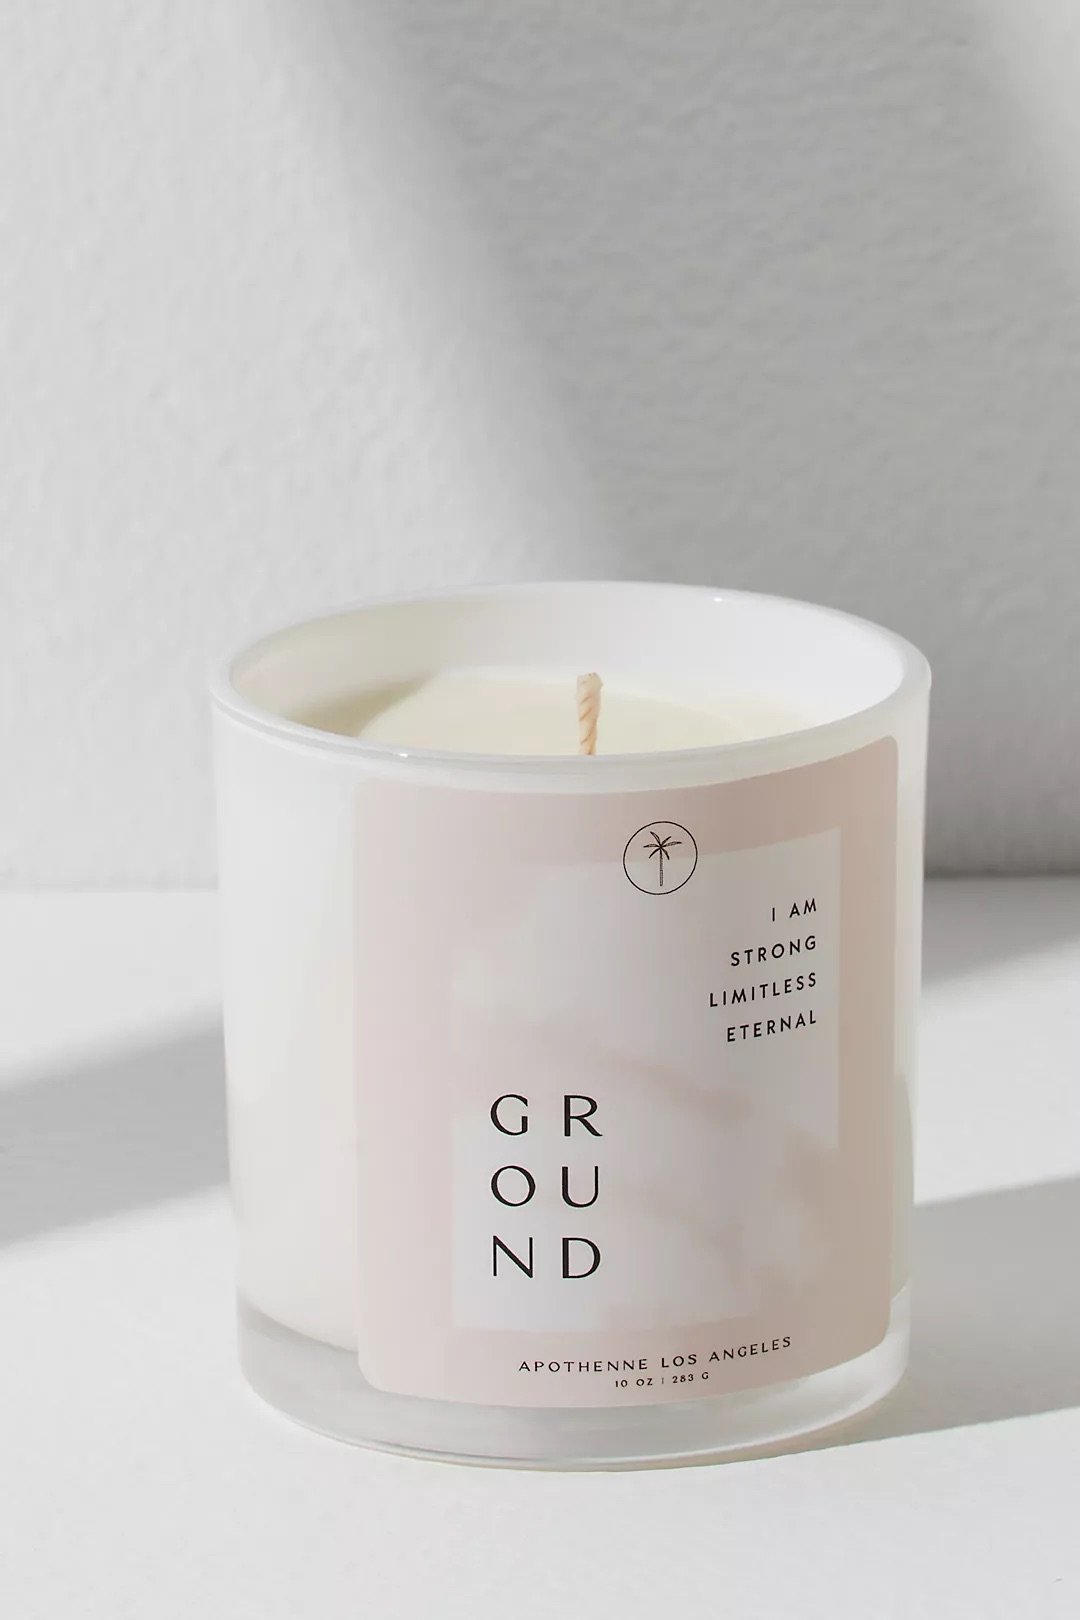 beautiful candle design for free people.jpg